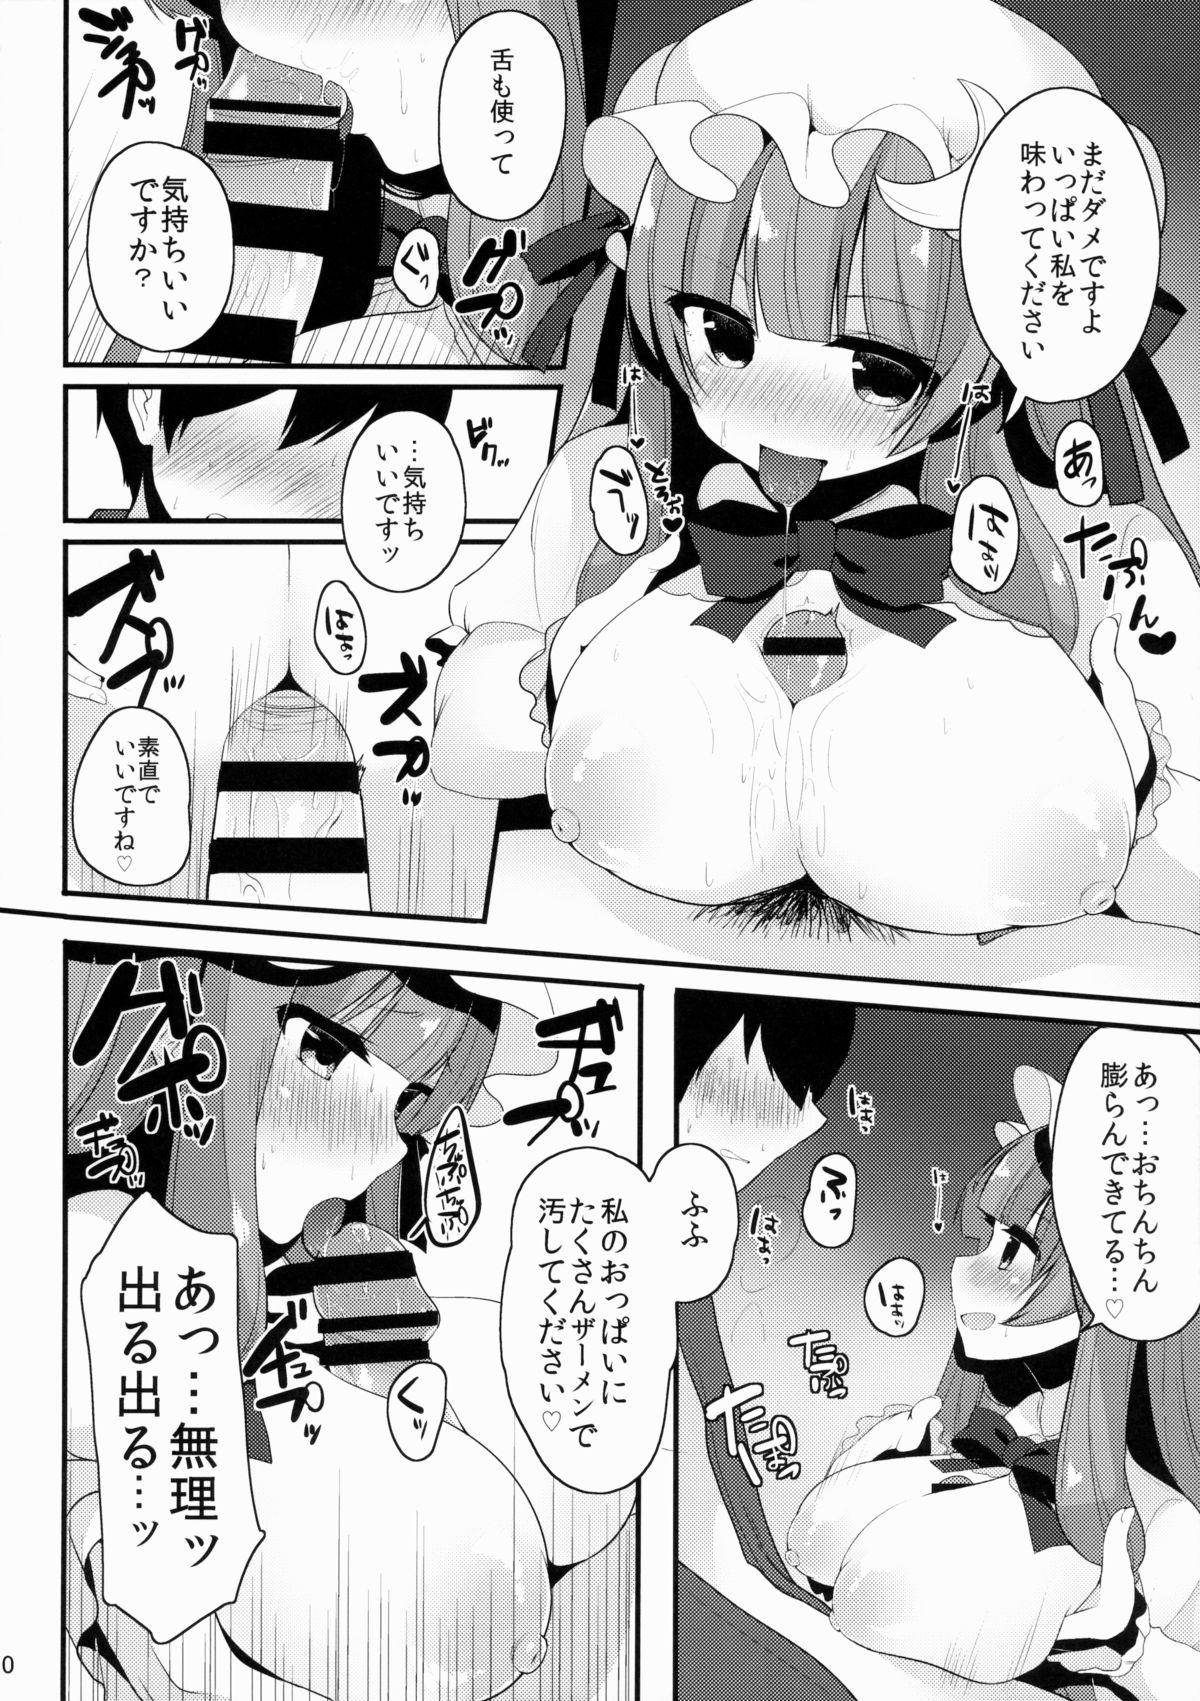 Chaturbate Oshigoto Patche-x - Touhou project Real Amateur - Page 11